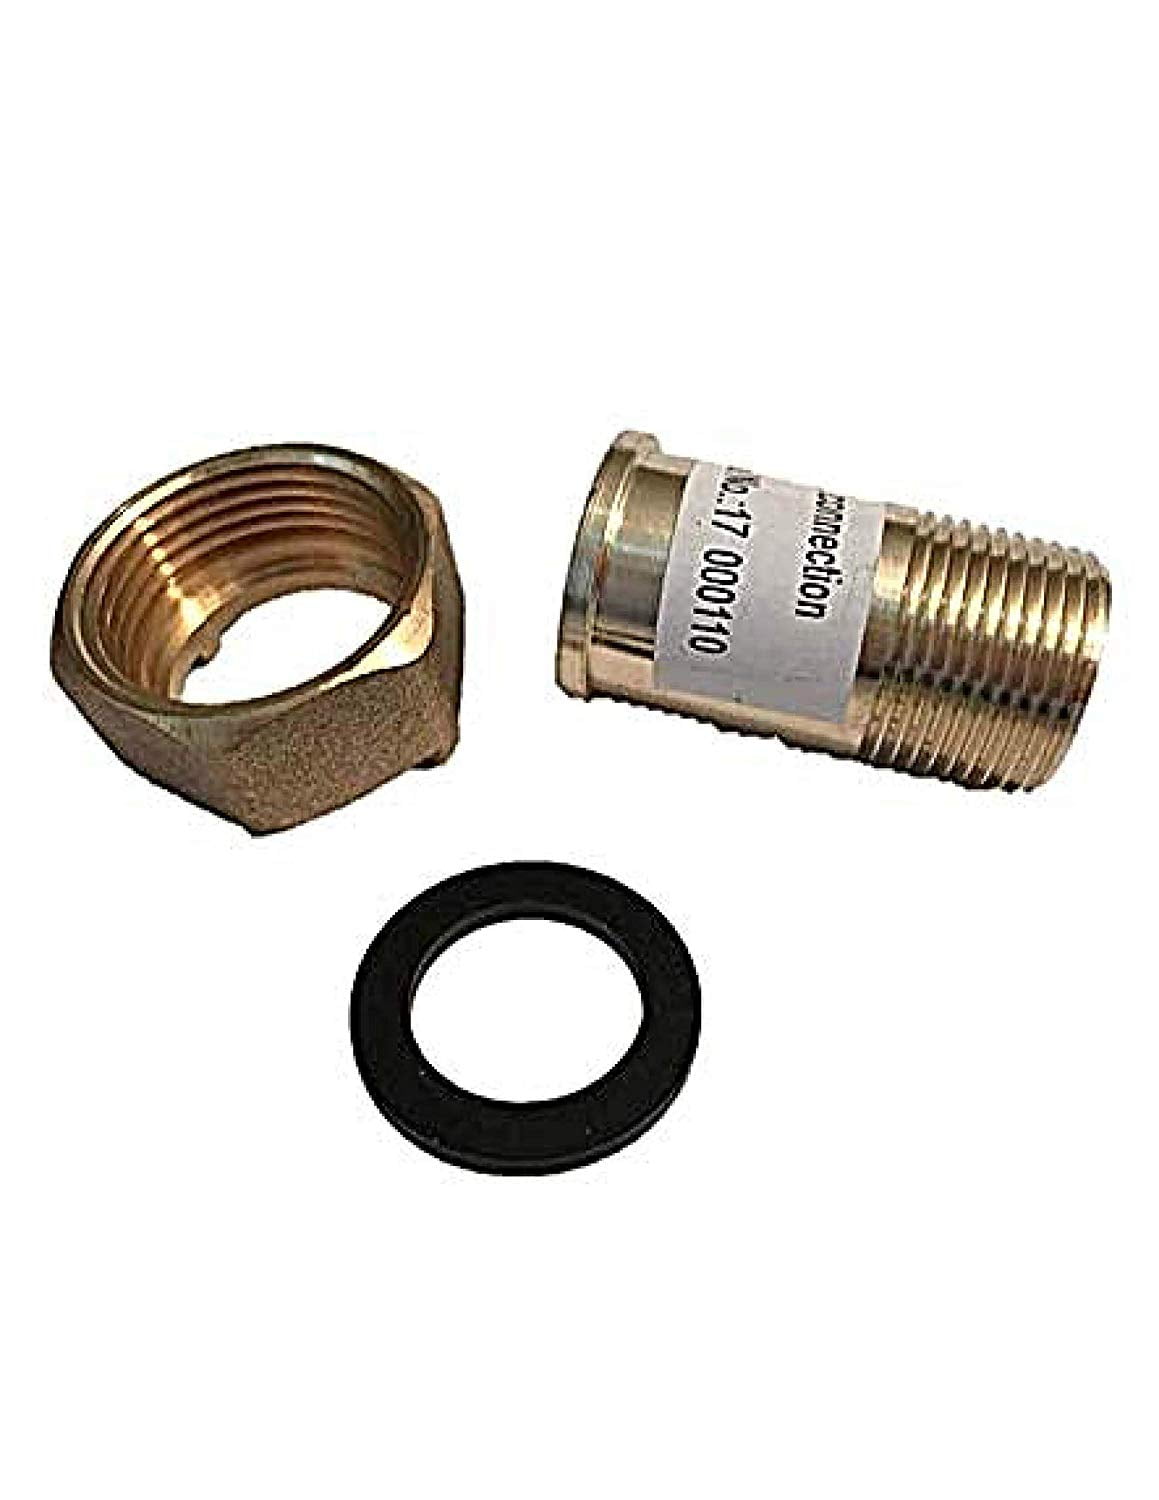 3/4" Lead Free Brass Water Meter coupling for 5/8 x 3/4 